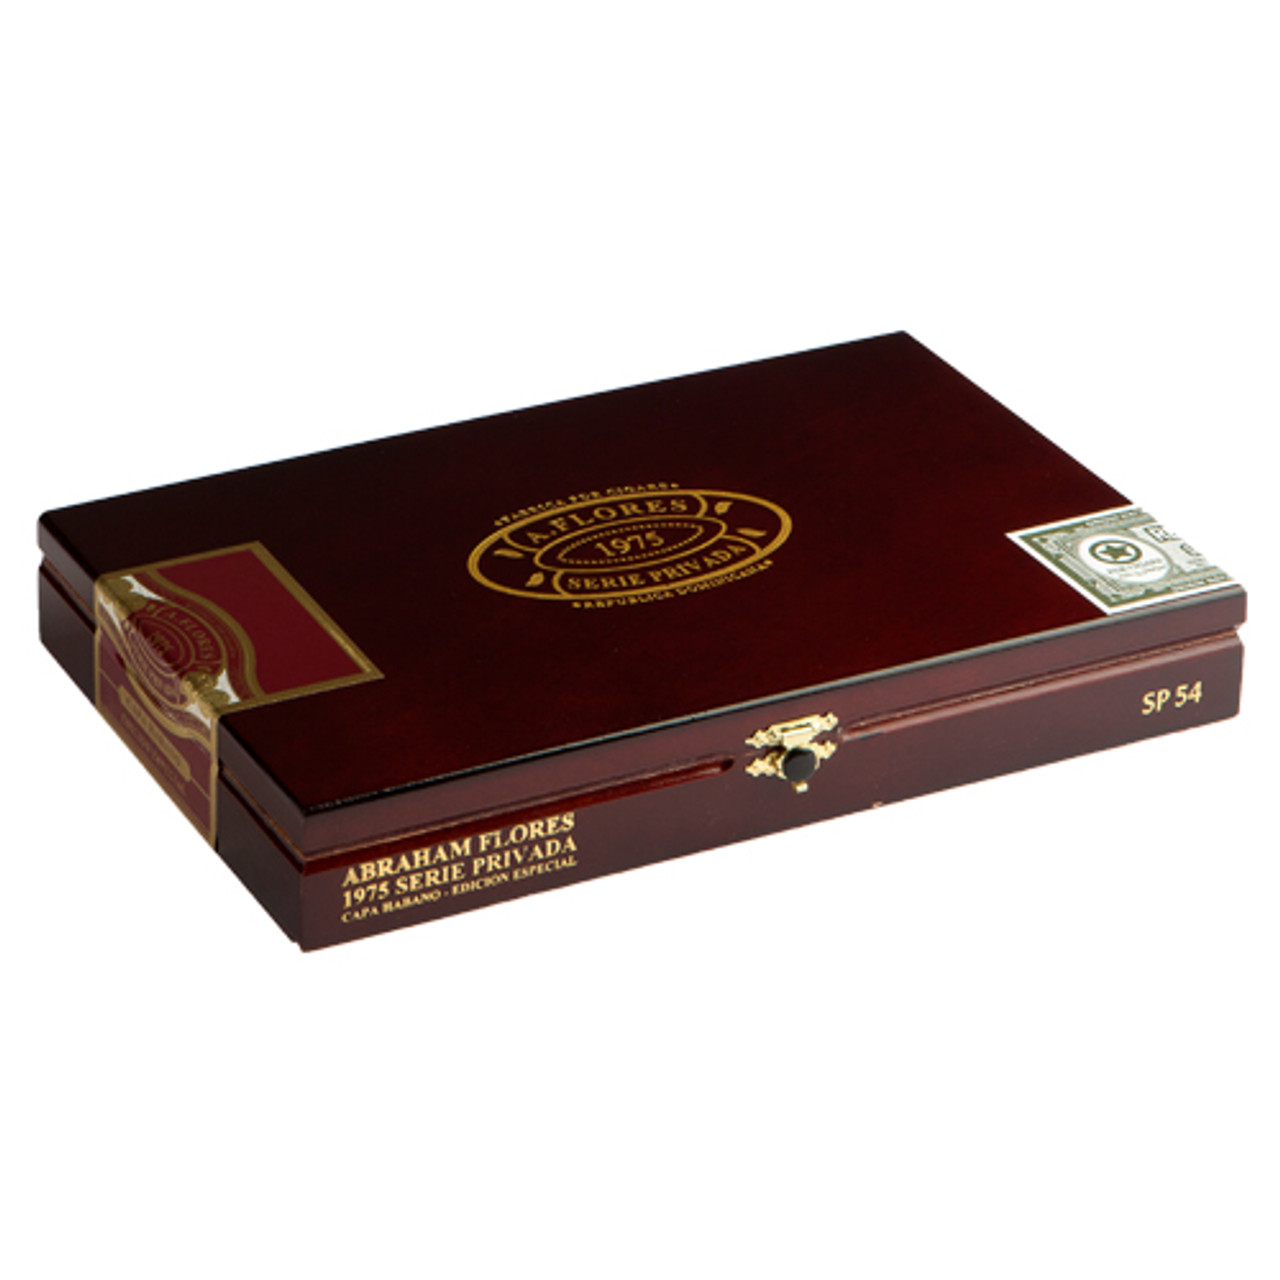 PDR A. Flores 1975 Serie Privada Capa Habano SP54 Cigars - 6 x 54 (Box of 24)